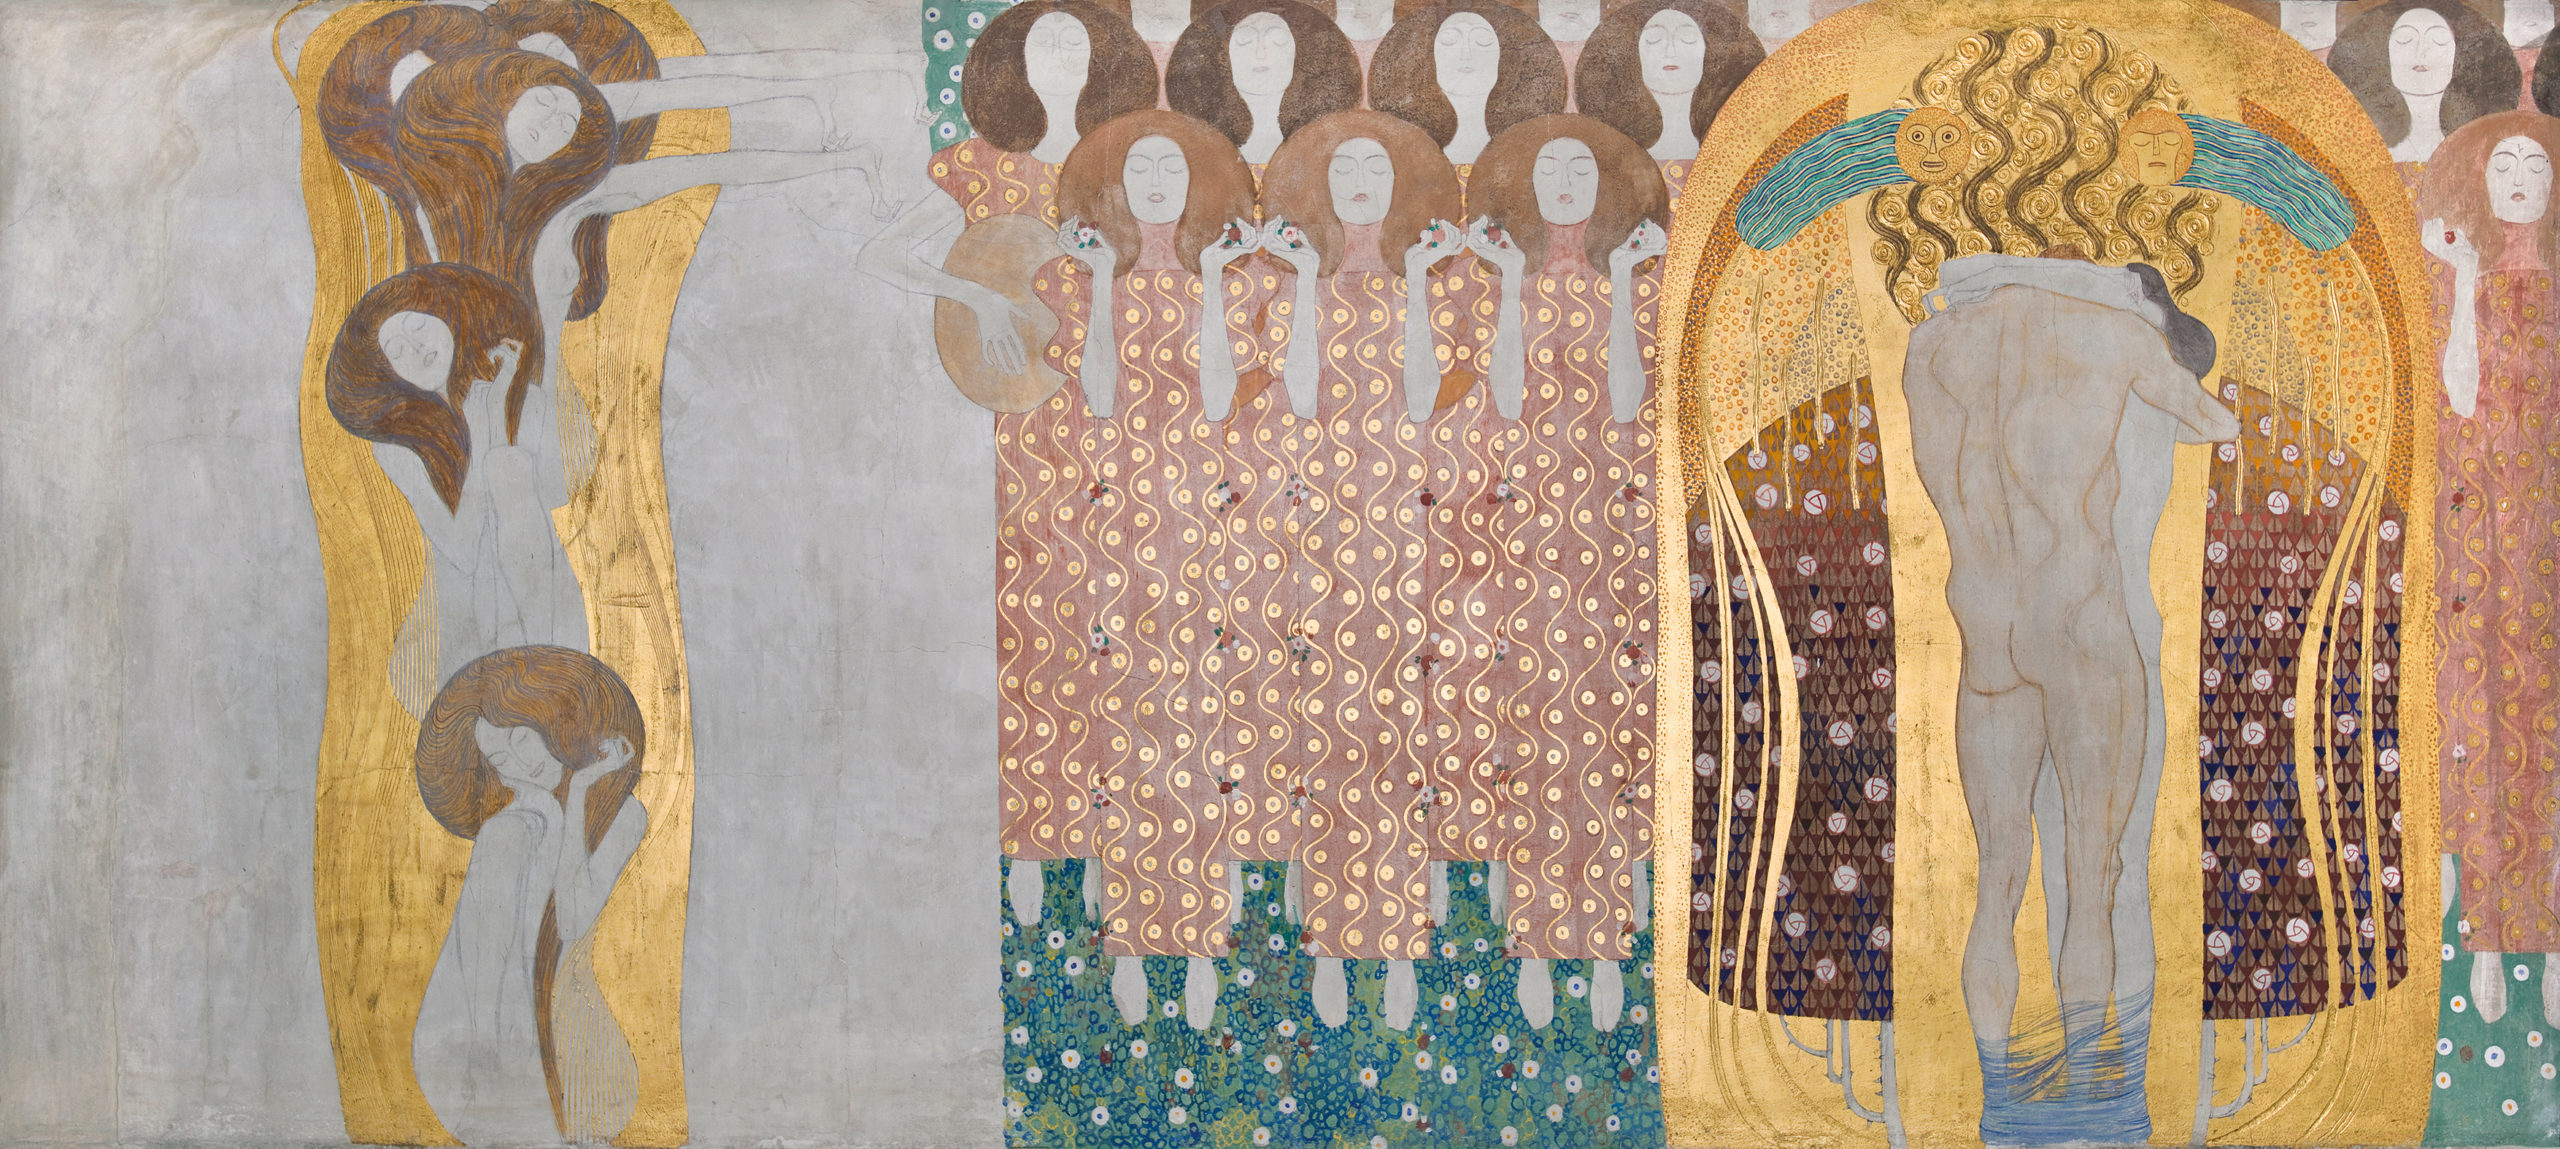 Gustav Klimt, Choir of Angels from the Beethoven Frieze, 1902, casein, stucco, gold, and semi-precious stones on plaster (Secession Building, Vienna)